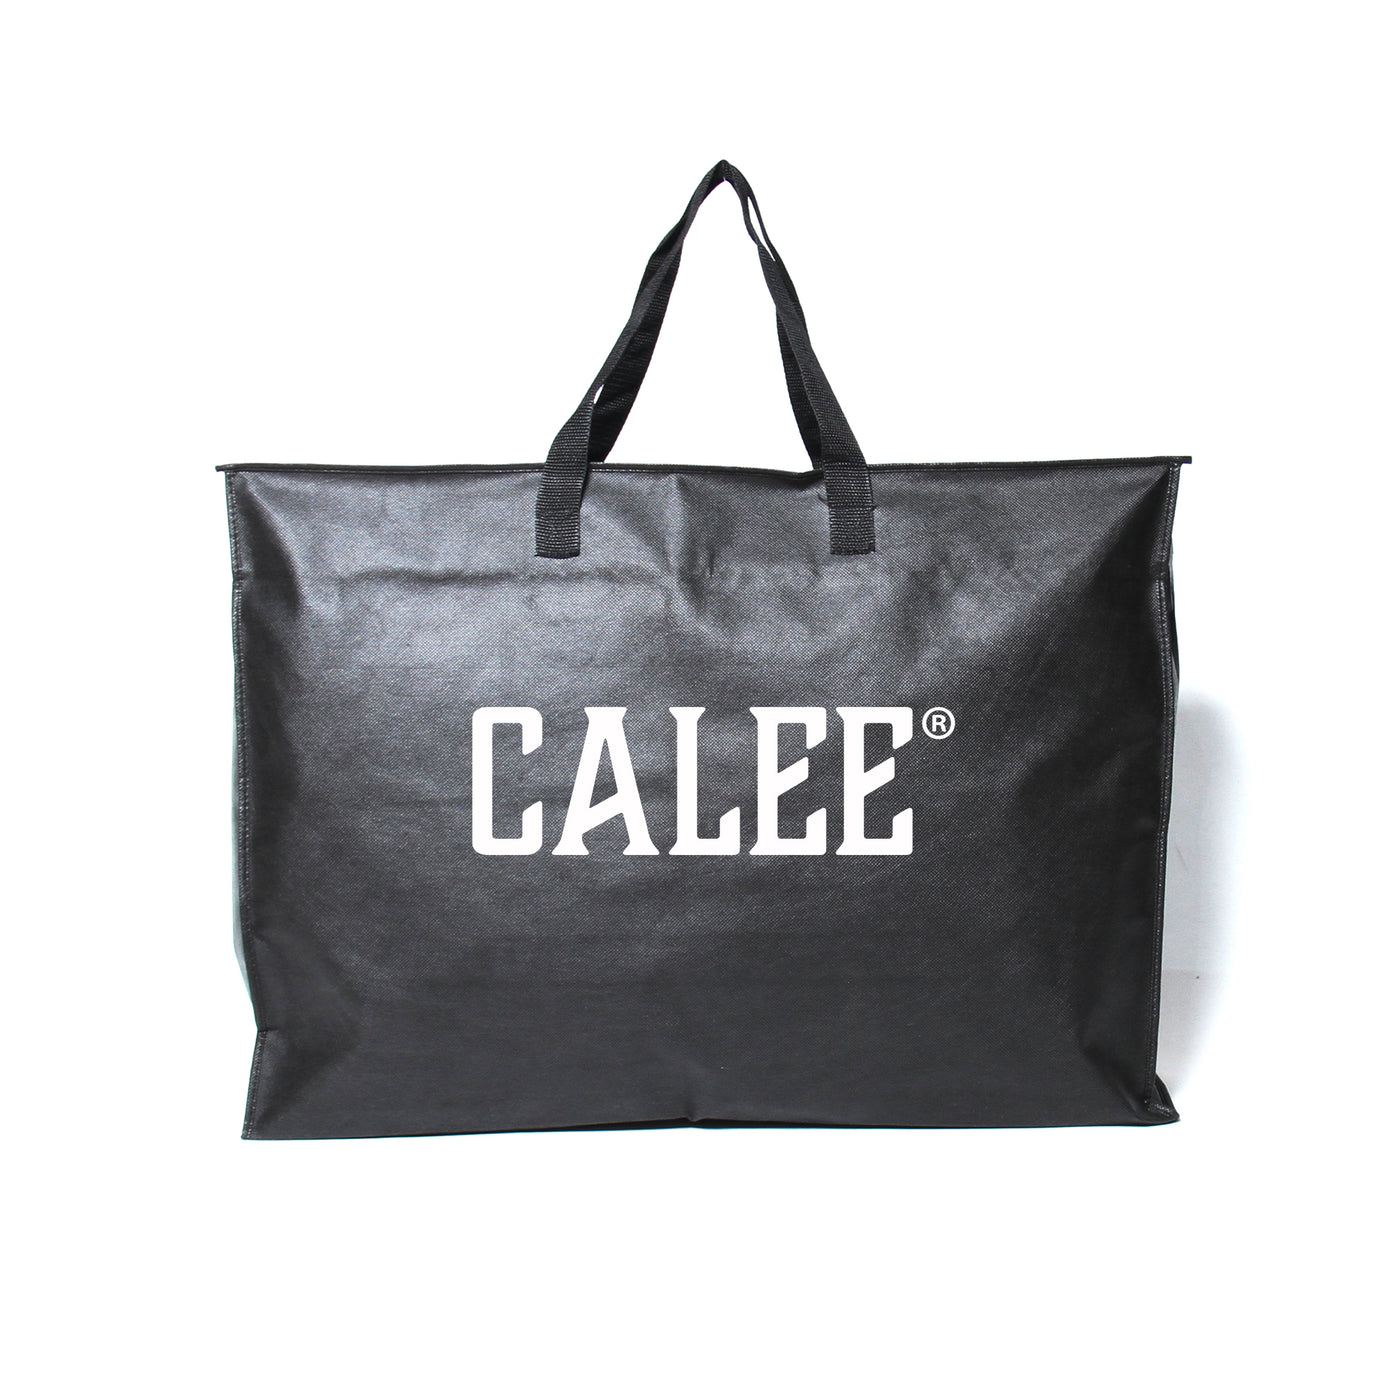 CALEE NEW YEAR HAPPY BAG / LARGE